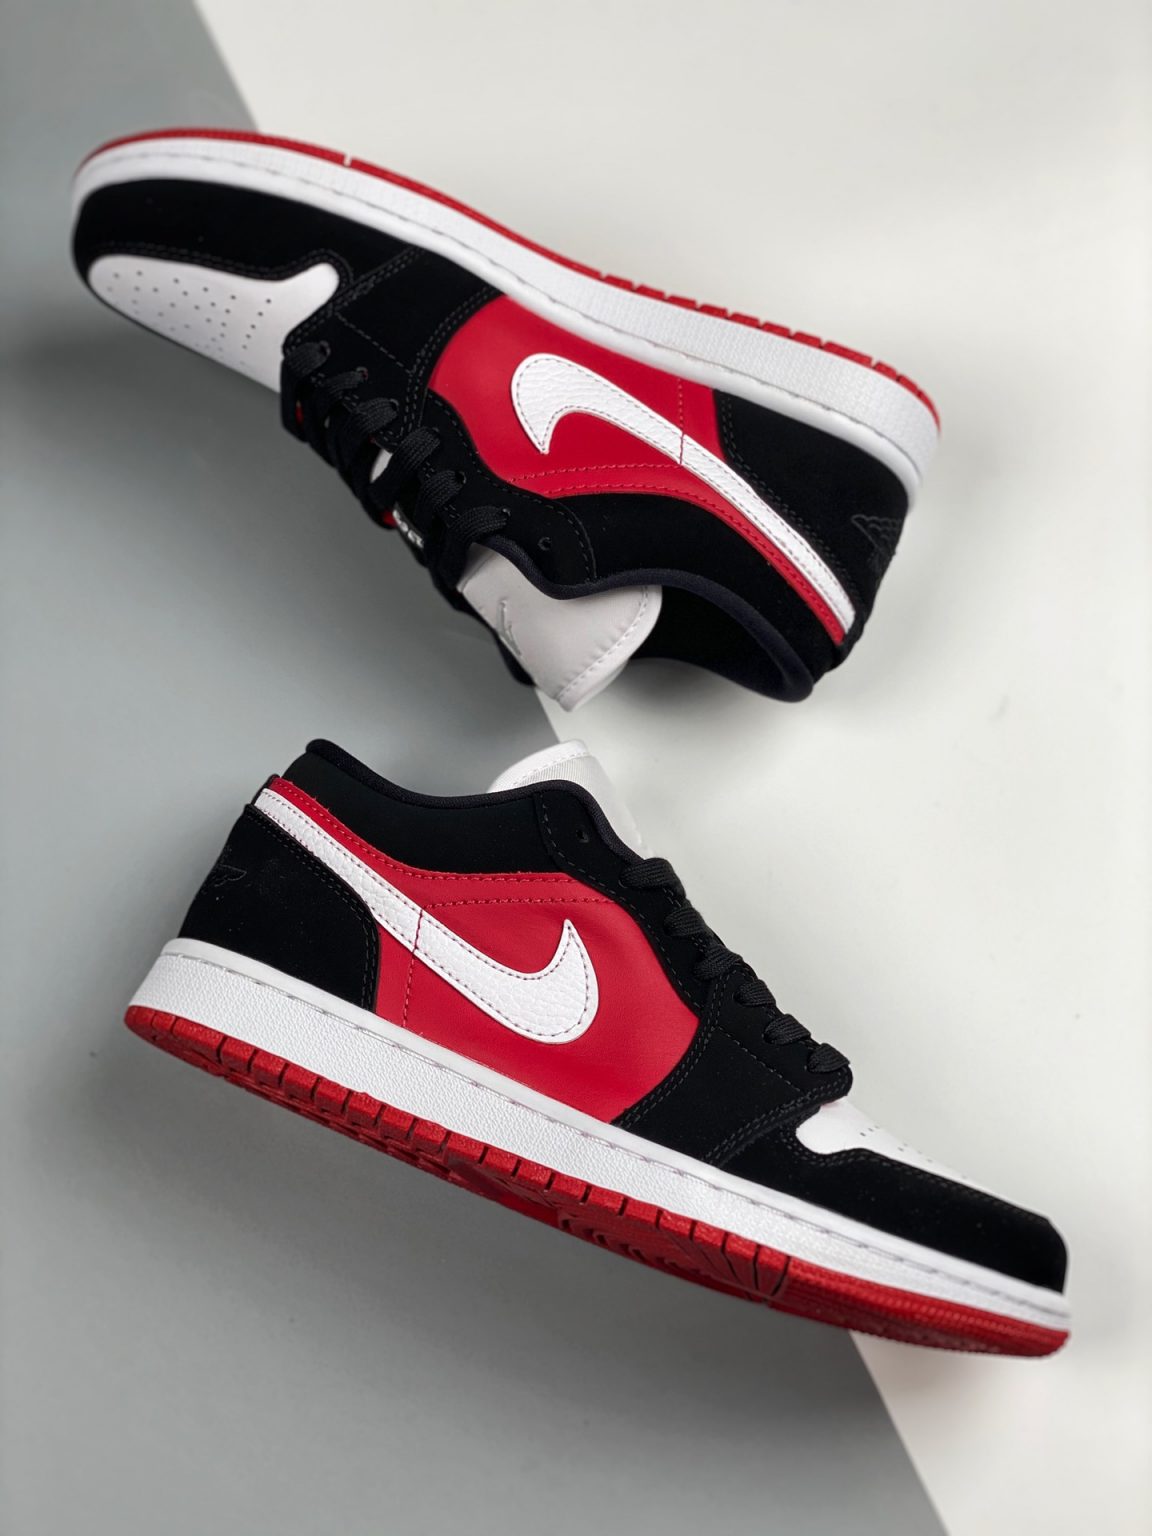 Air Jordan 1 Low ‘chicago Black Red White Dc0774 016 For Sale